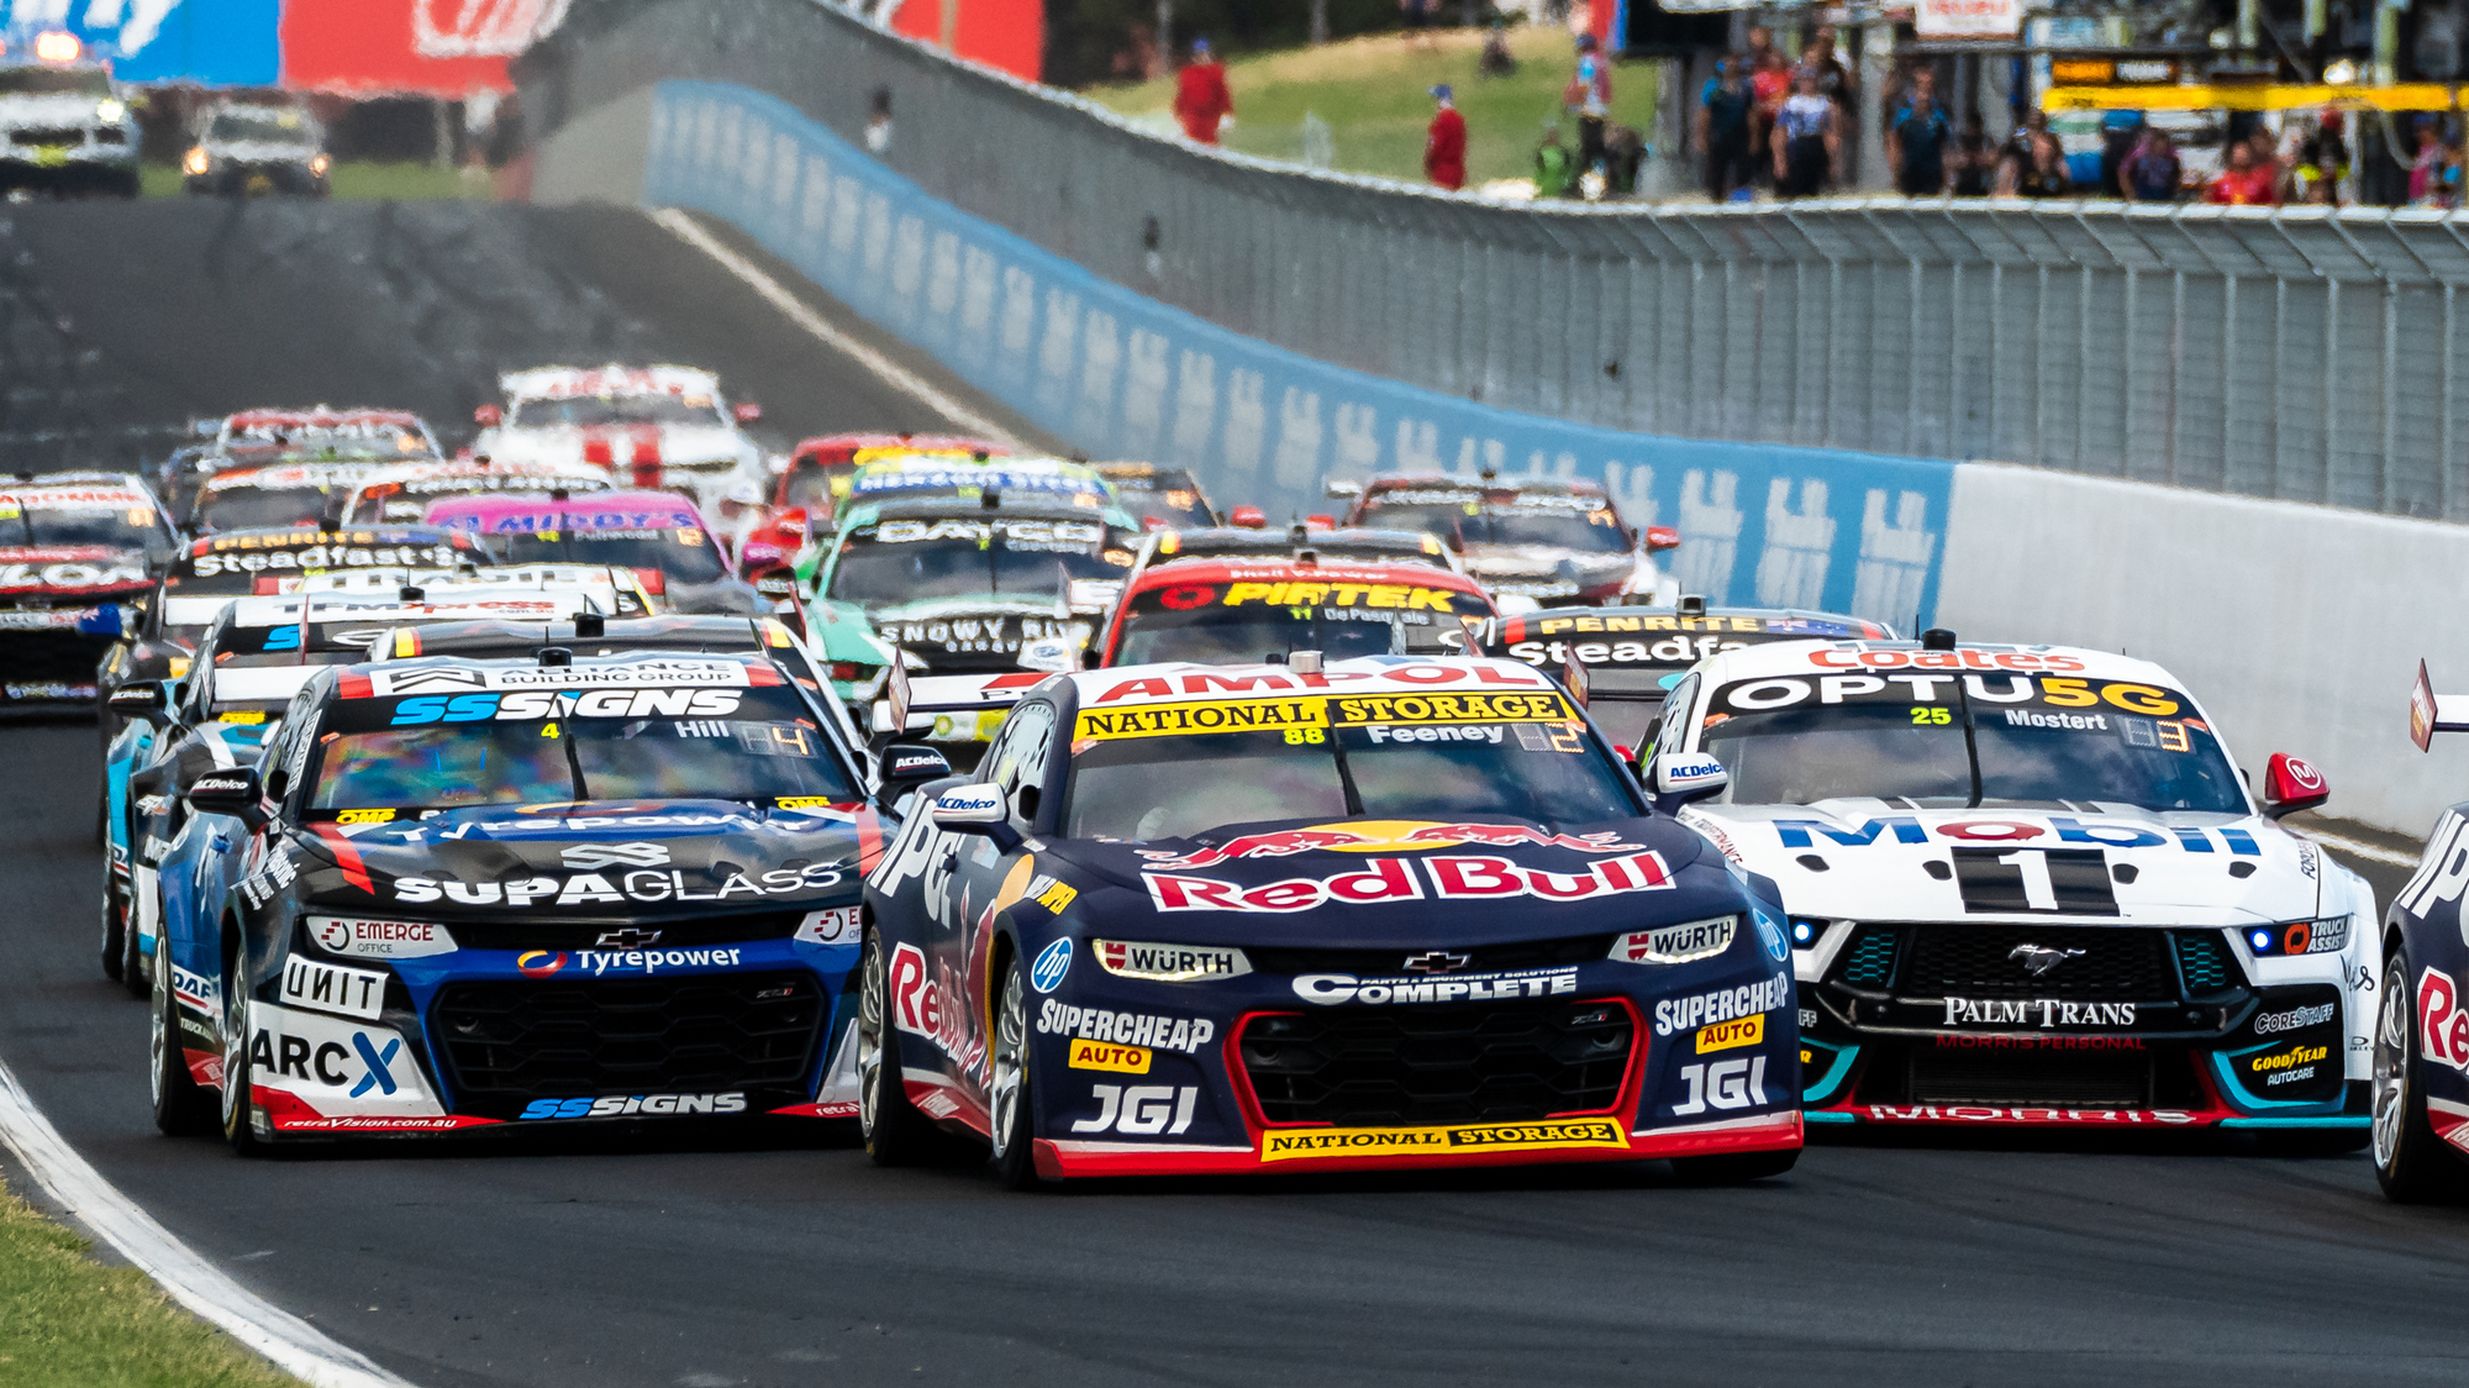 The start of the Supercars race at Mount Panorama.